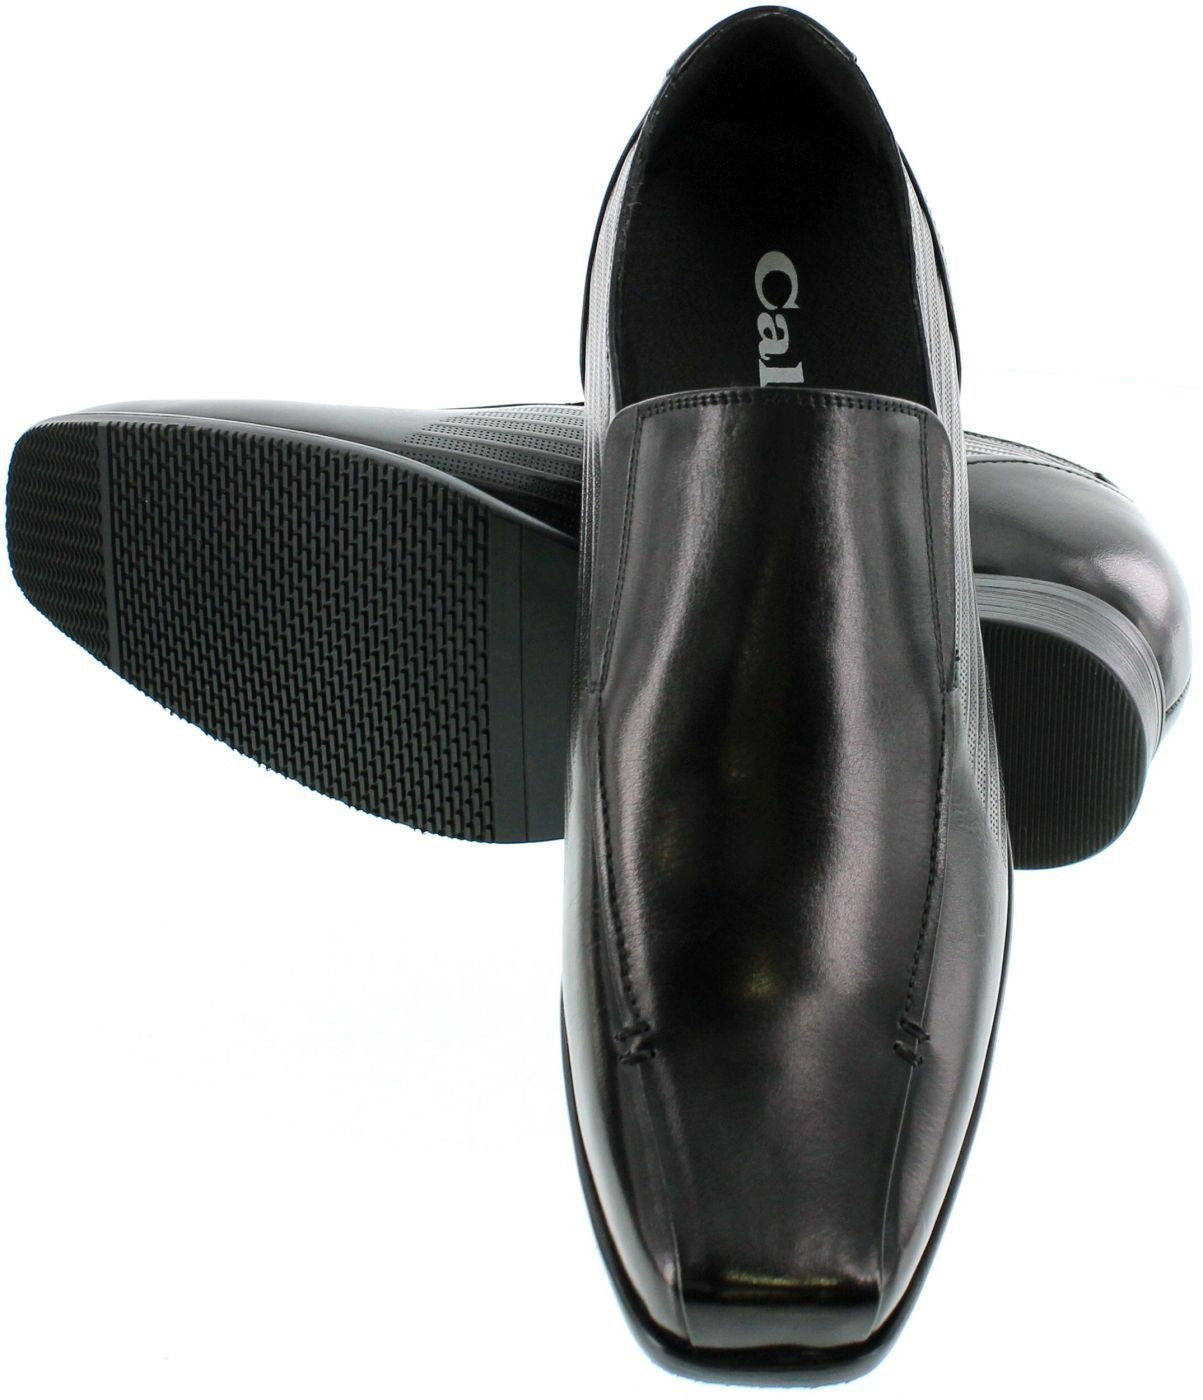 Elevator shoes height increase CALTO - Y3026 - 3 Inches Taller (Black)